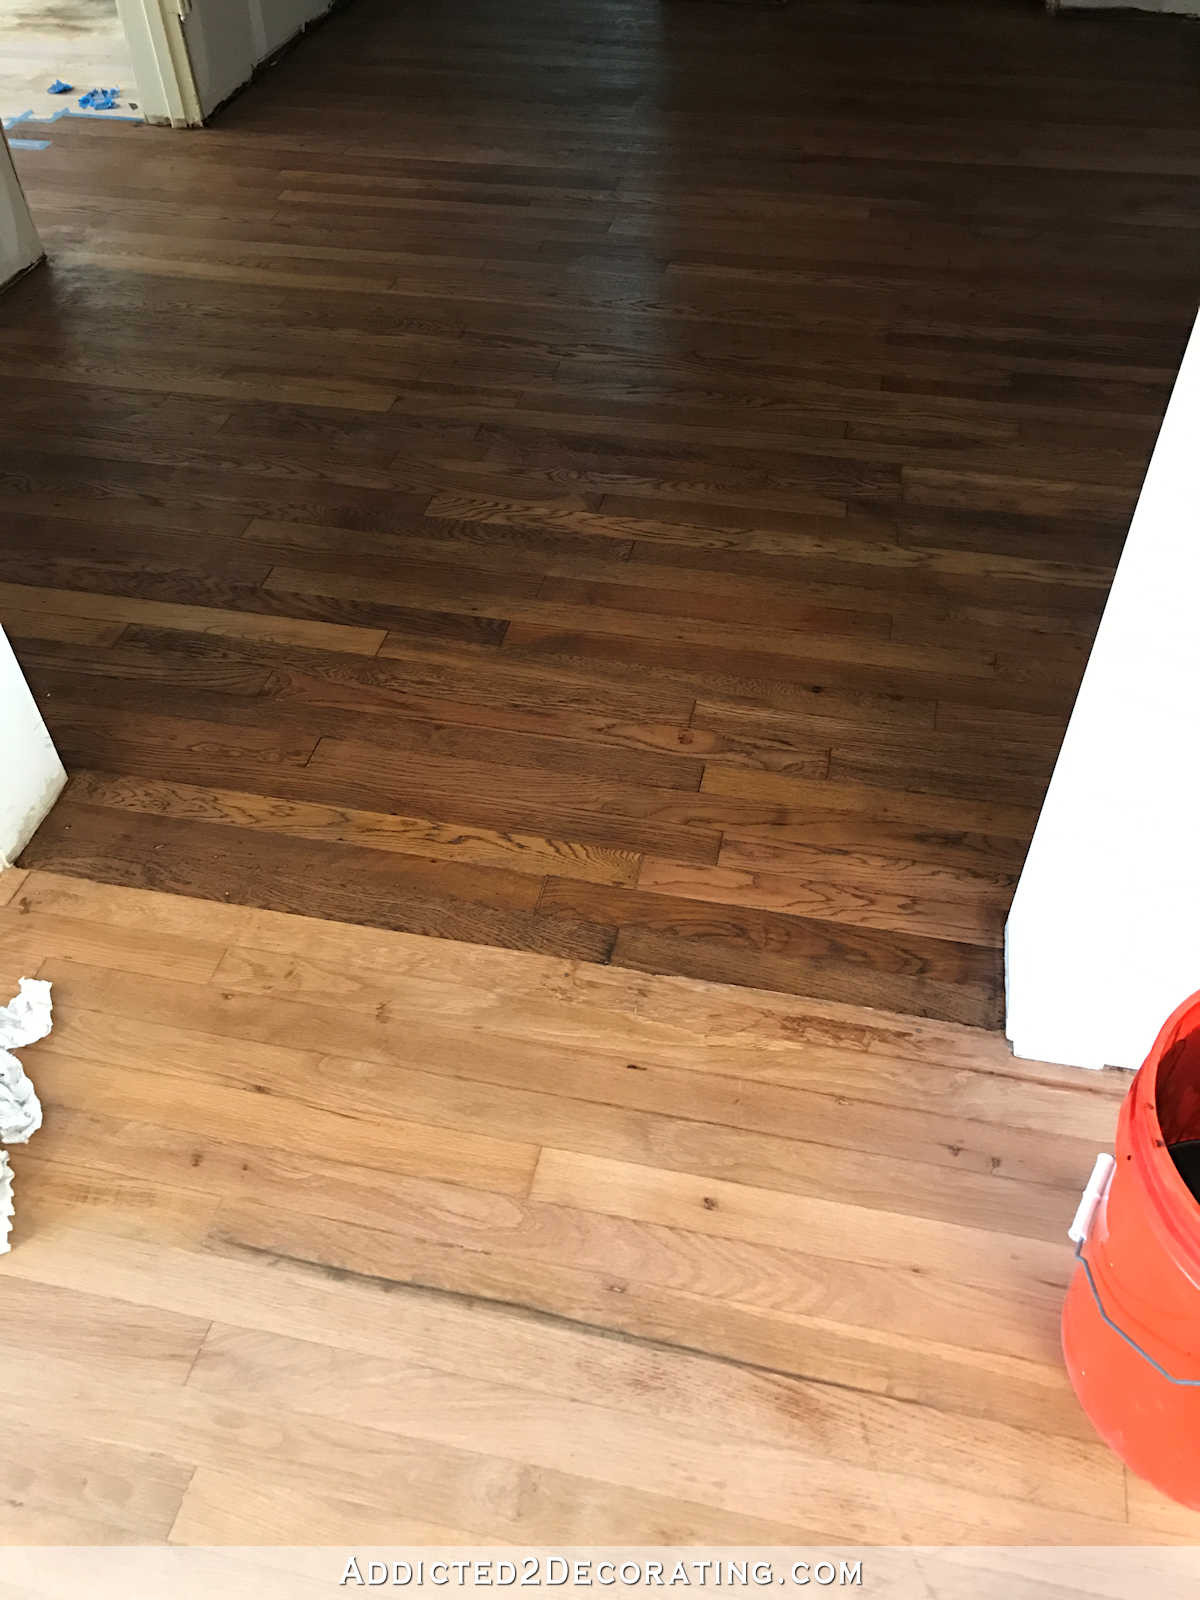 14 Cute Hardwood Flooring Reno Depot 2024 free download hardwood flooring reno depot of adventures in staining my red oak hardwood floors products process pertaining to staining red oak hardwood floors 2 tape off one section at a time for